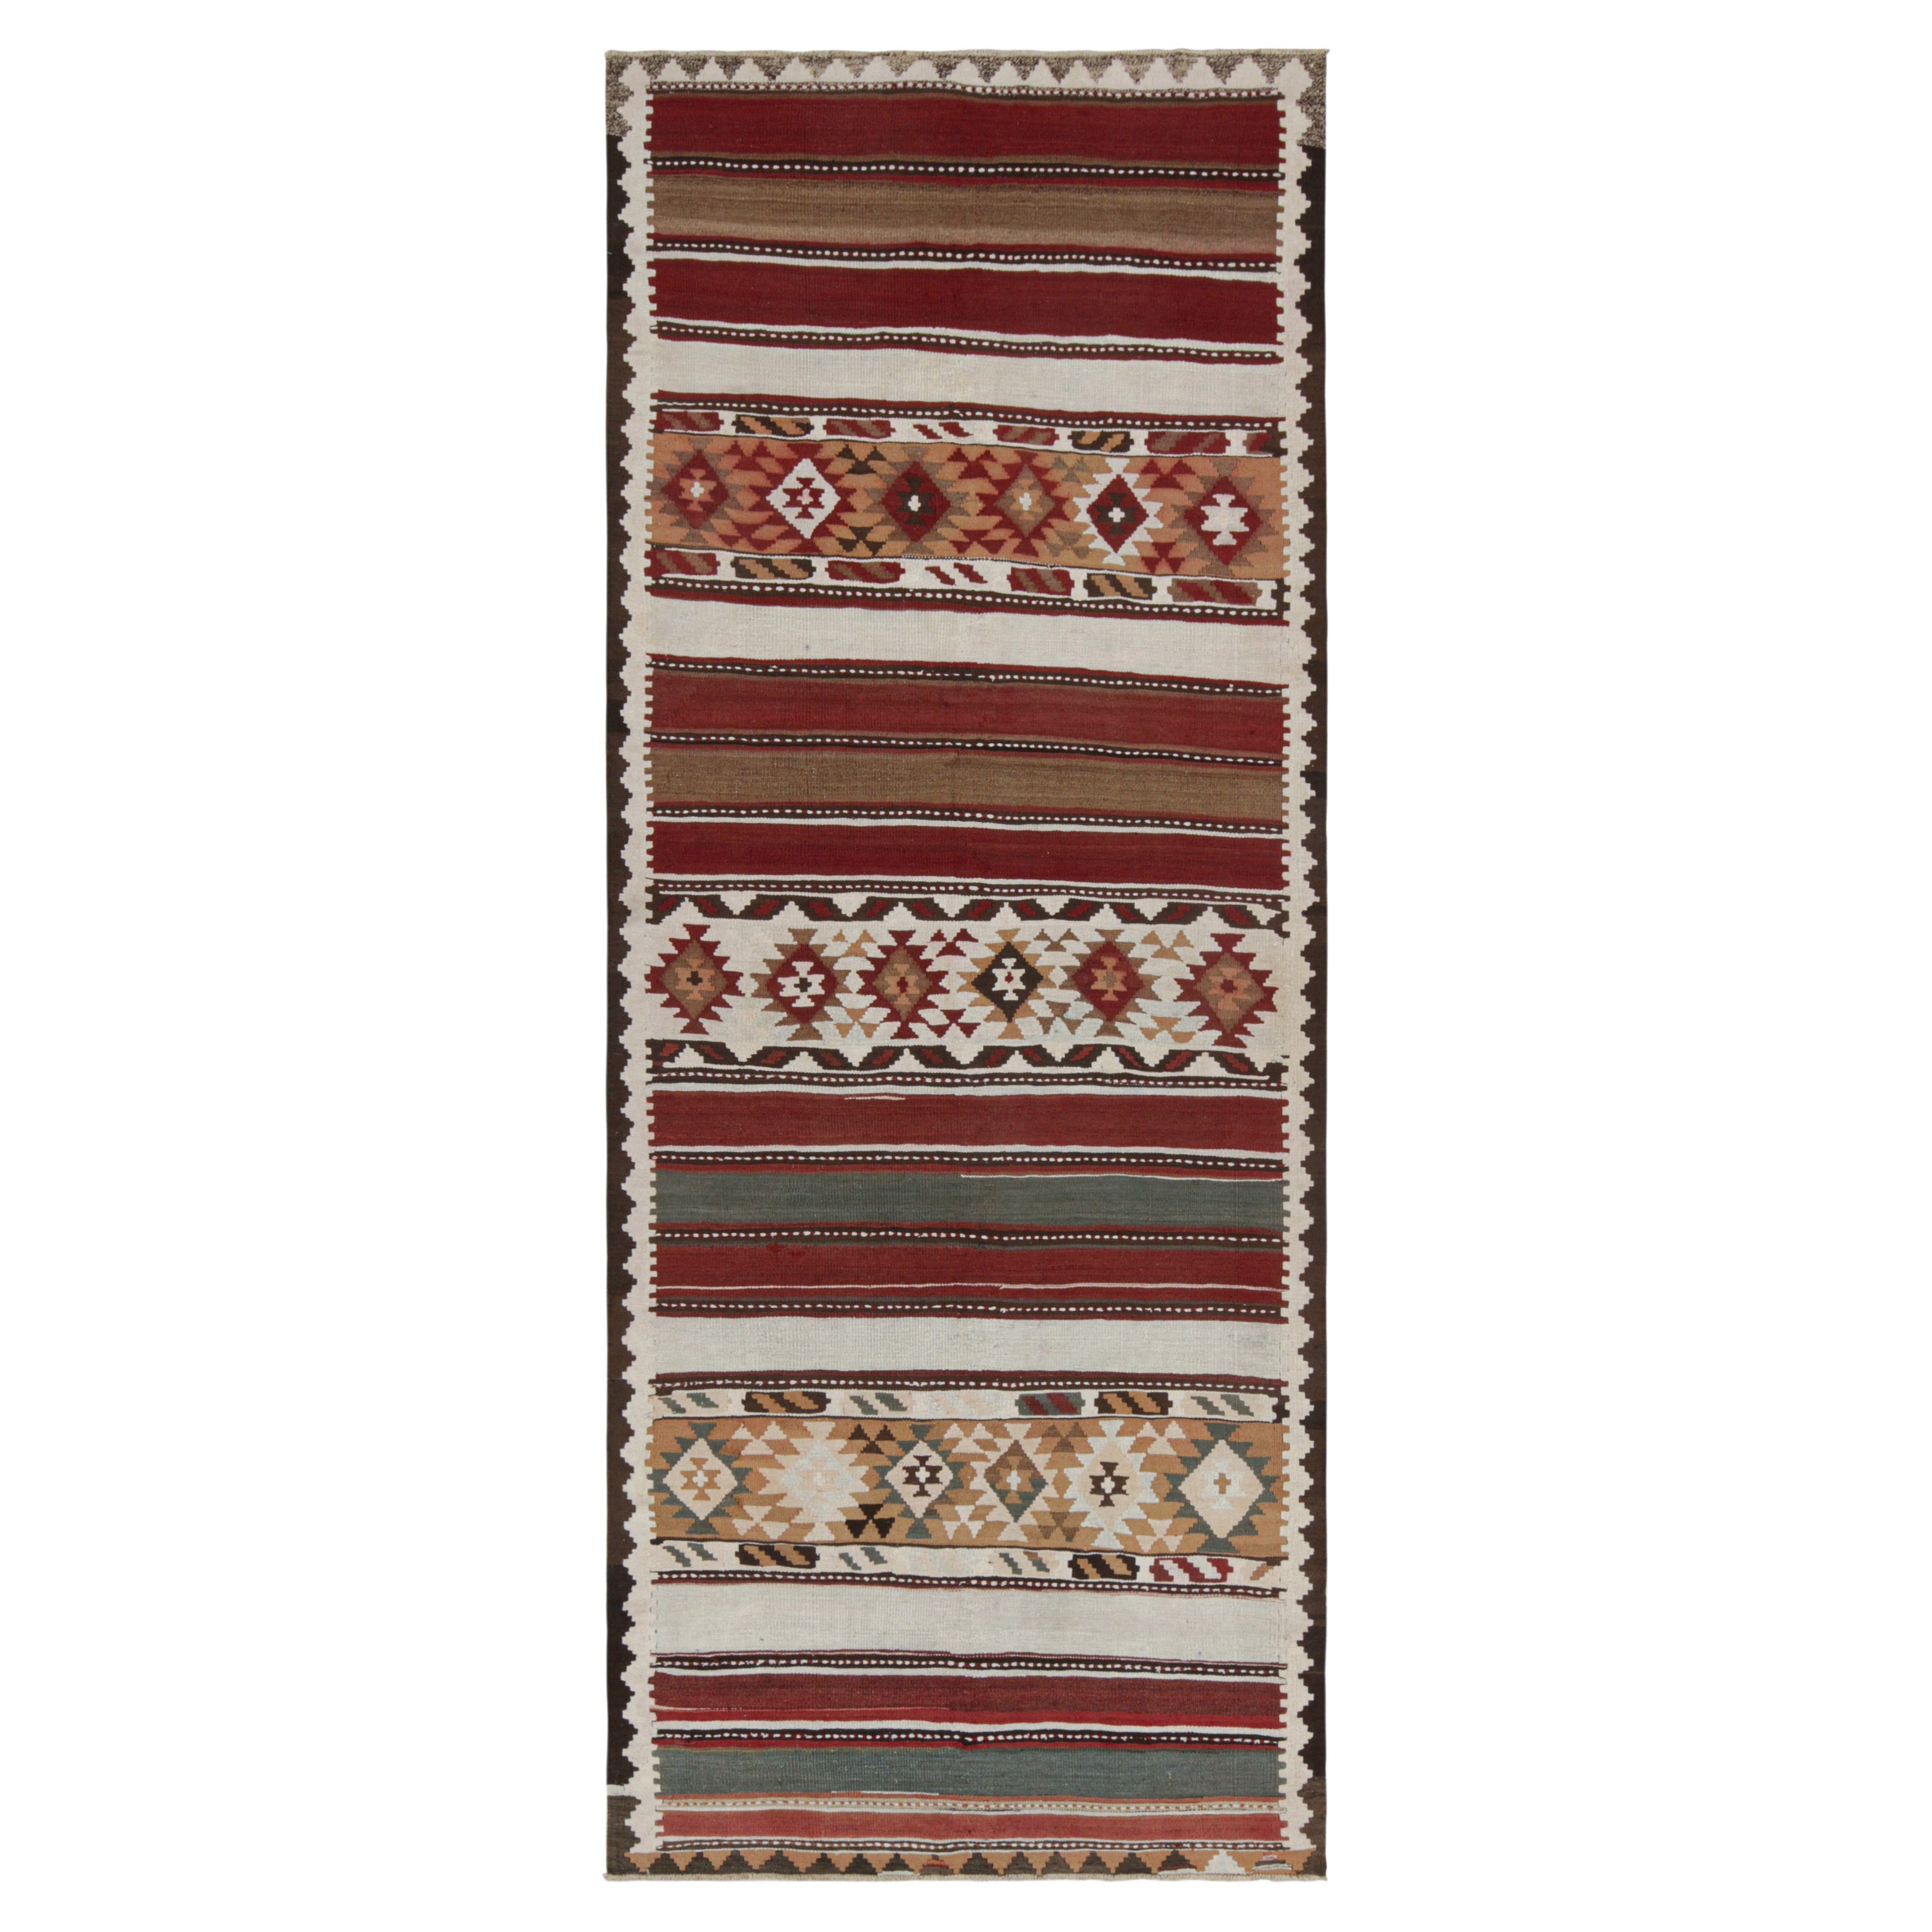 Vintage Shahsavan Persian Kilim in Red, White and Beige-Brown Geometric Patterns For Sale